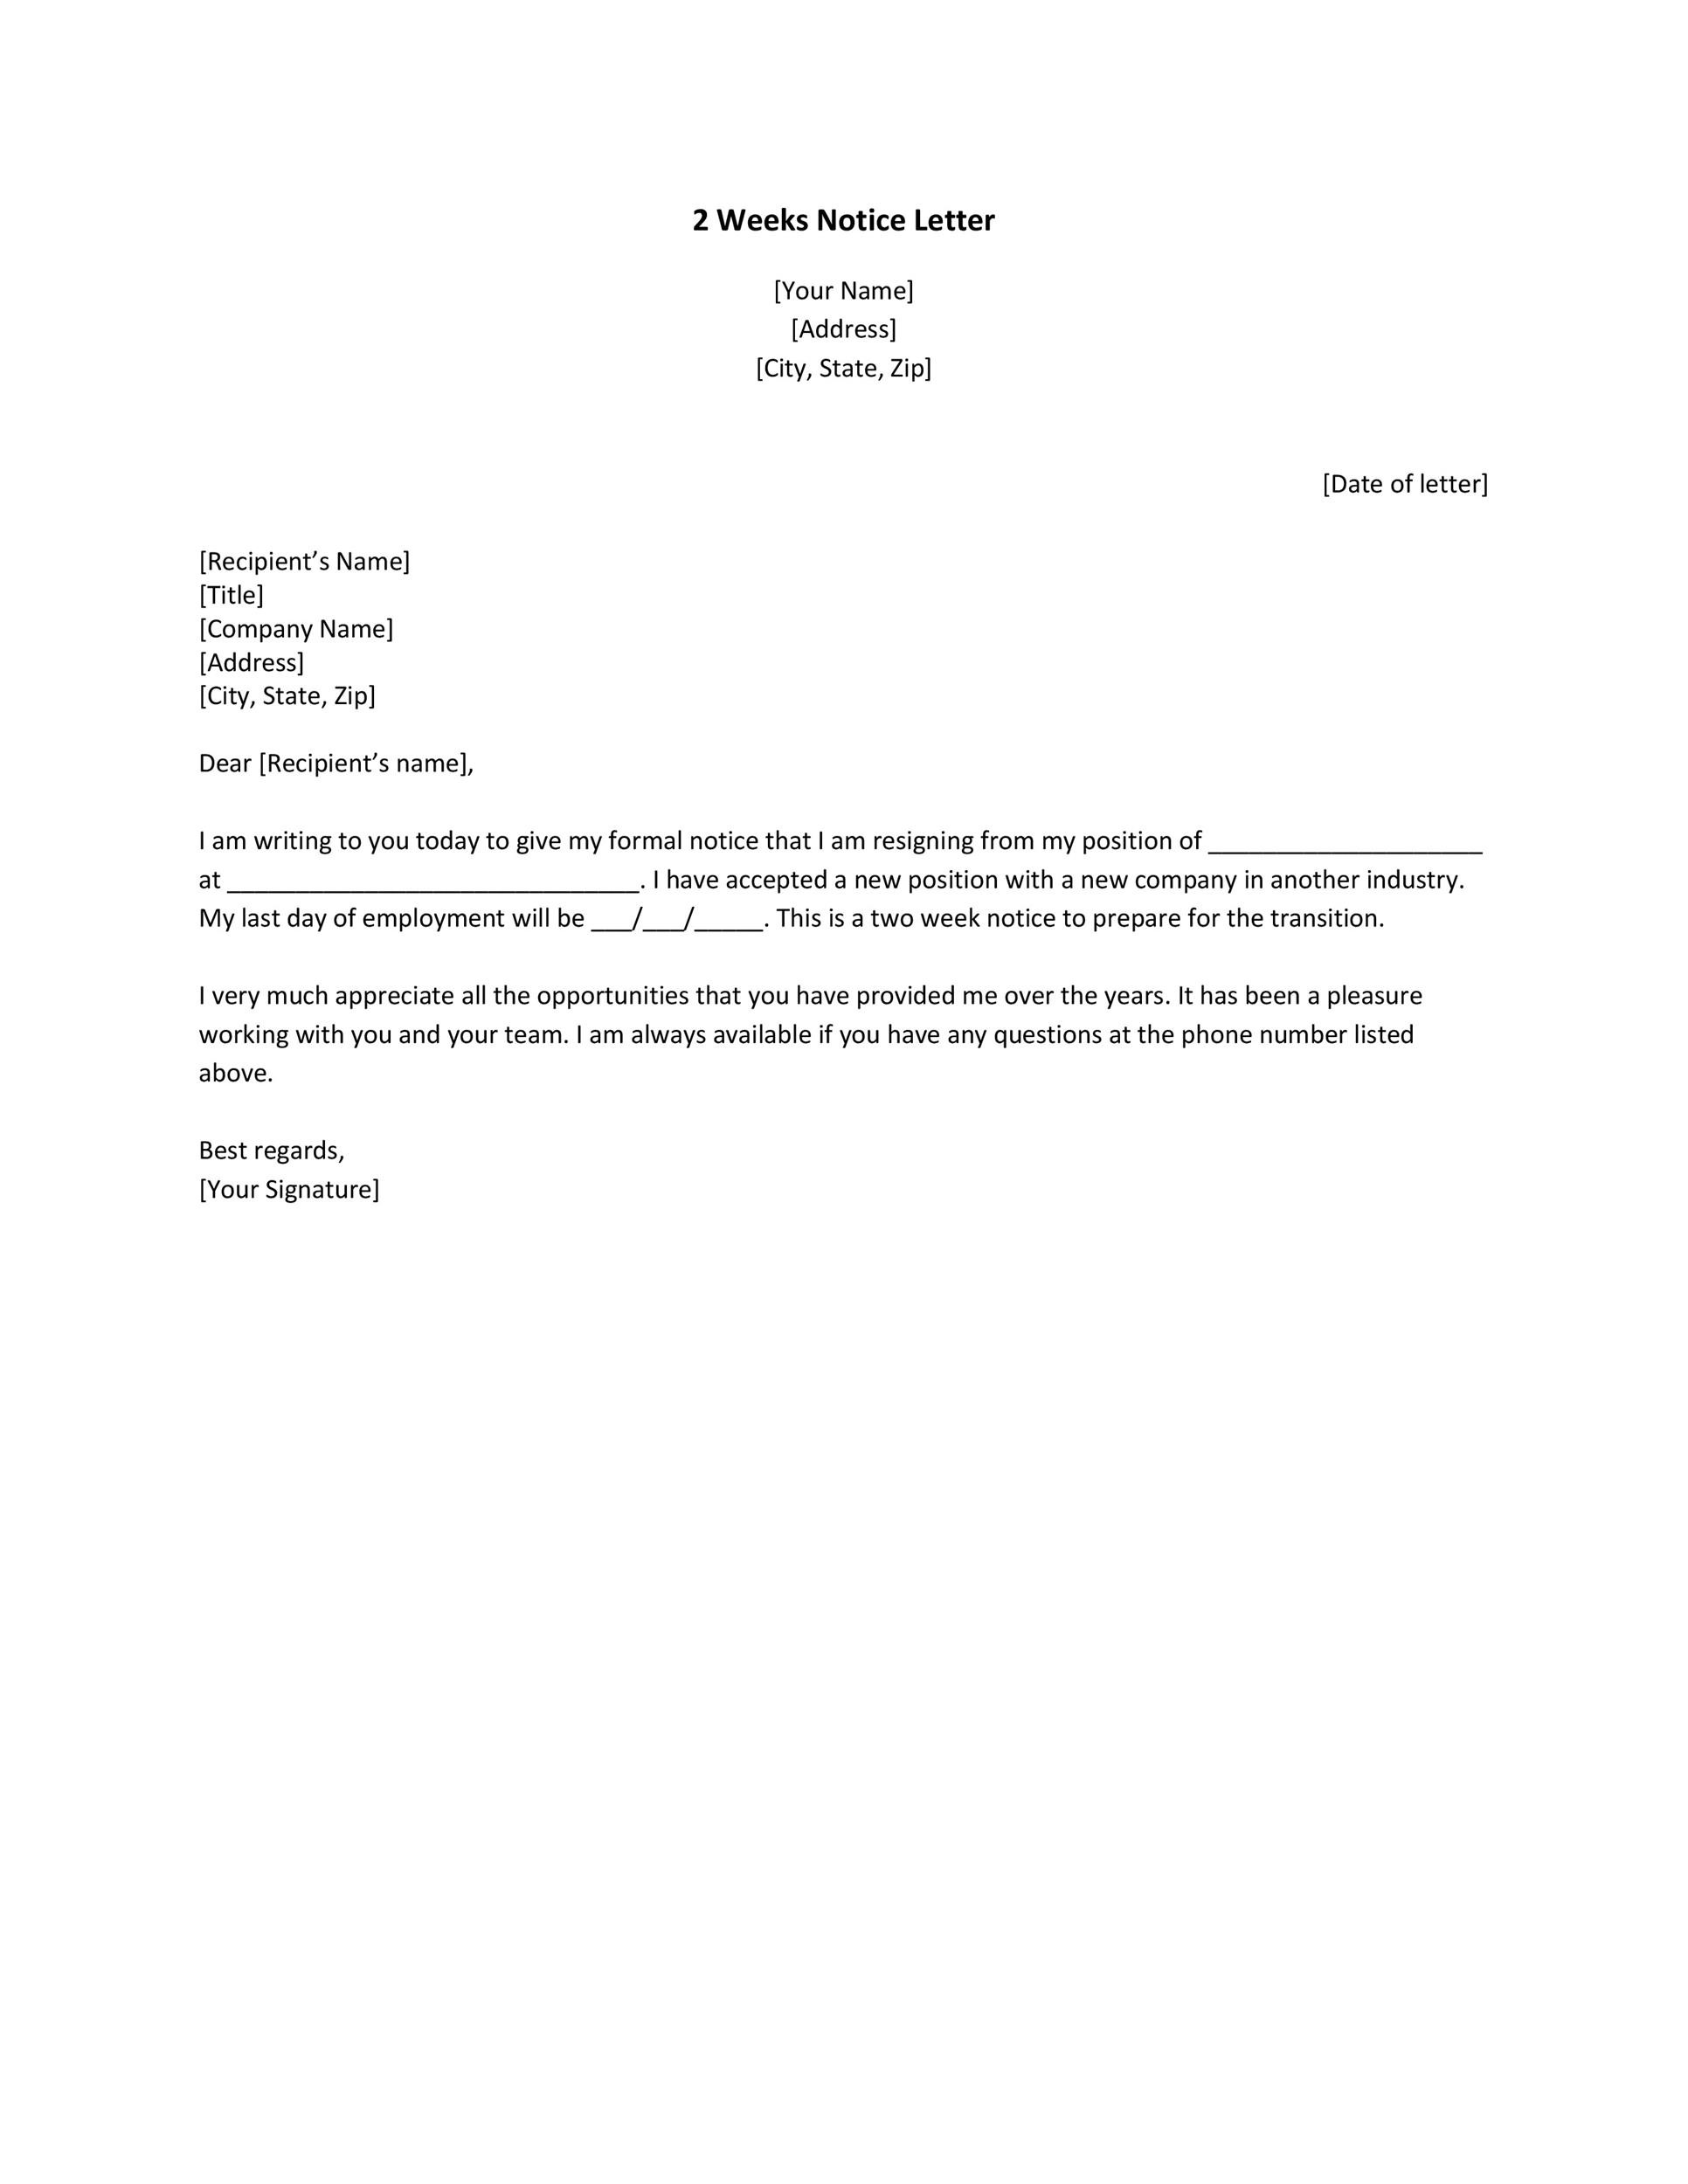 2 Week Notice Letter For Job from templatelab.com